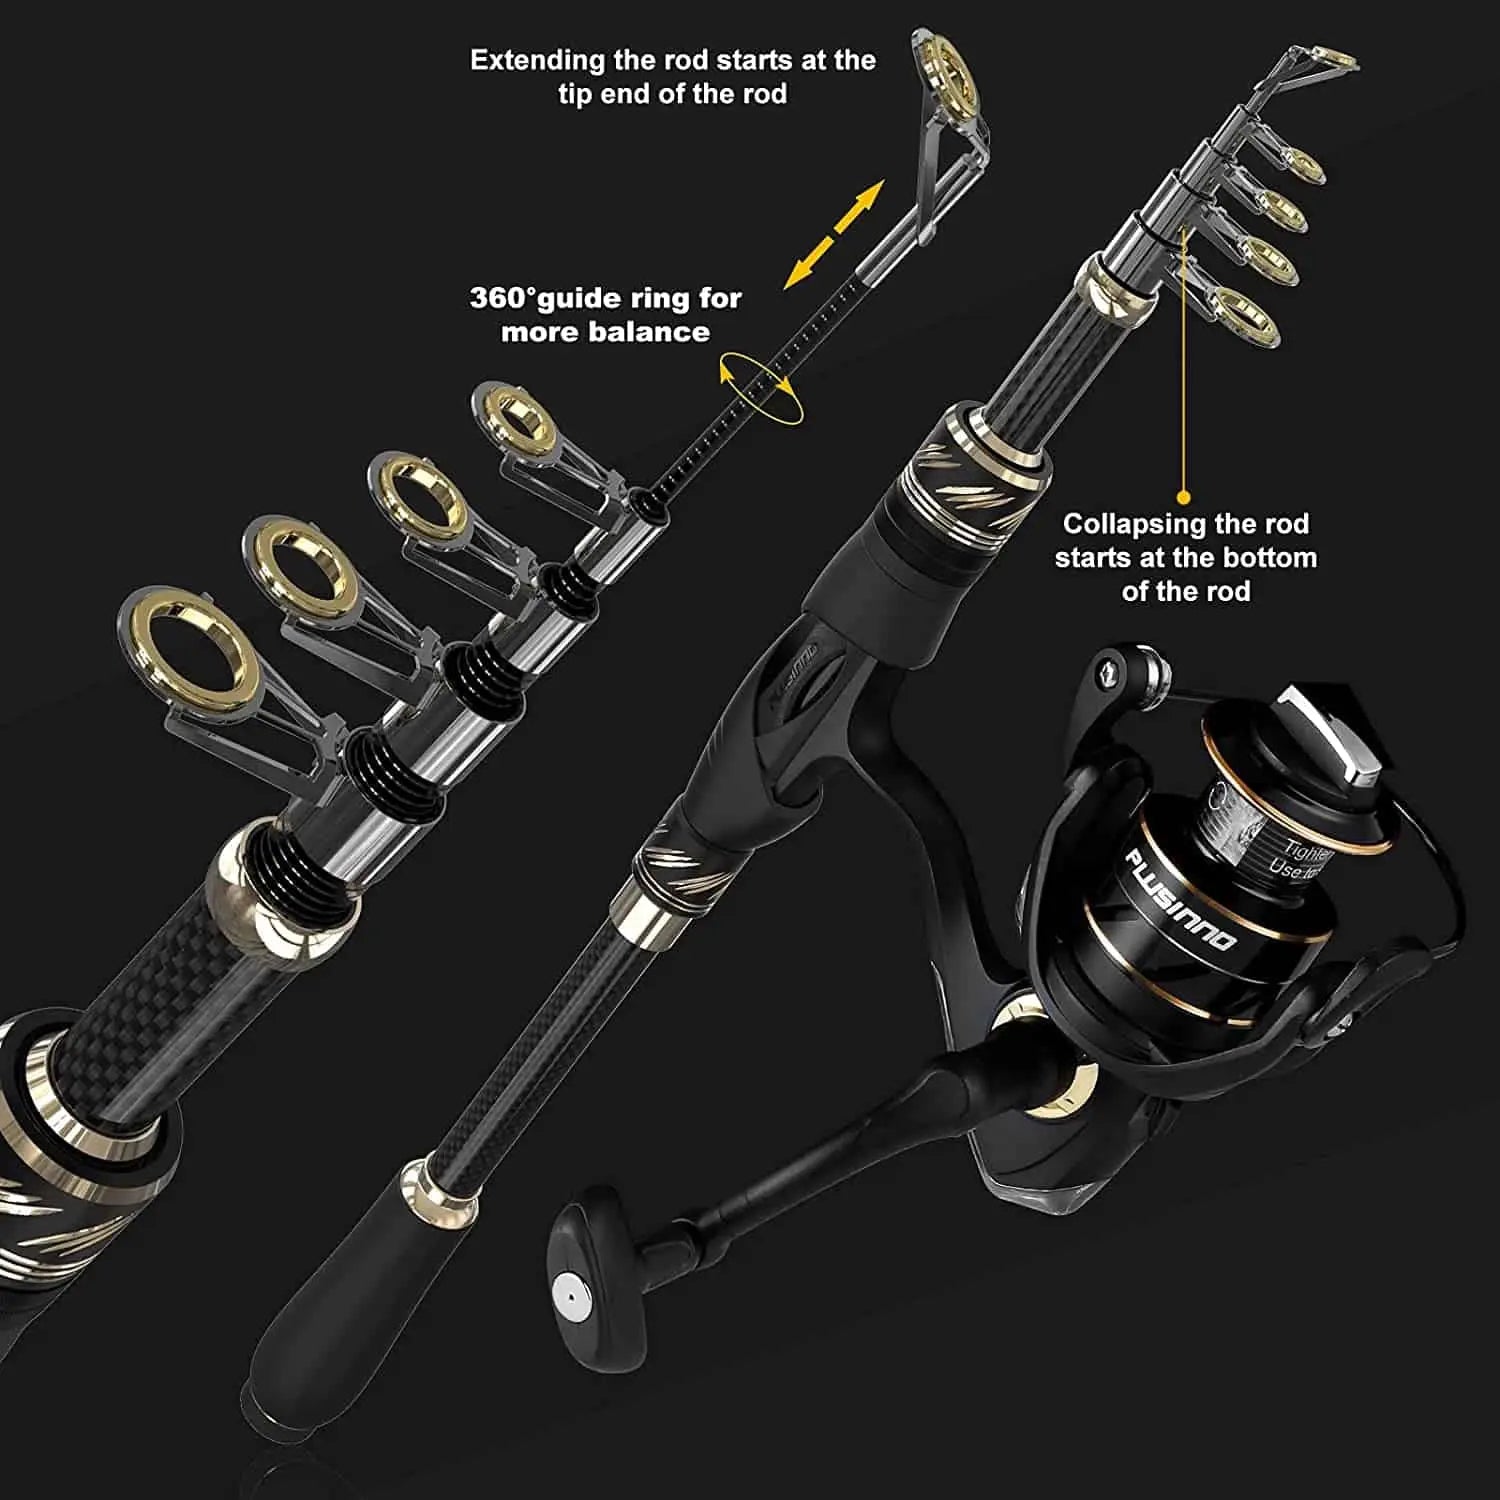 PLUSINNO Eagle Hunting Ⅸ Telescopic Fishing Rods and Reel Combos – Plusinno